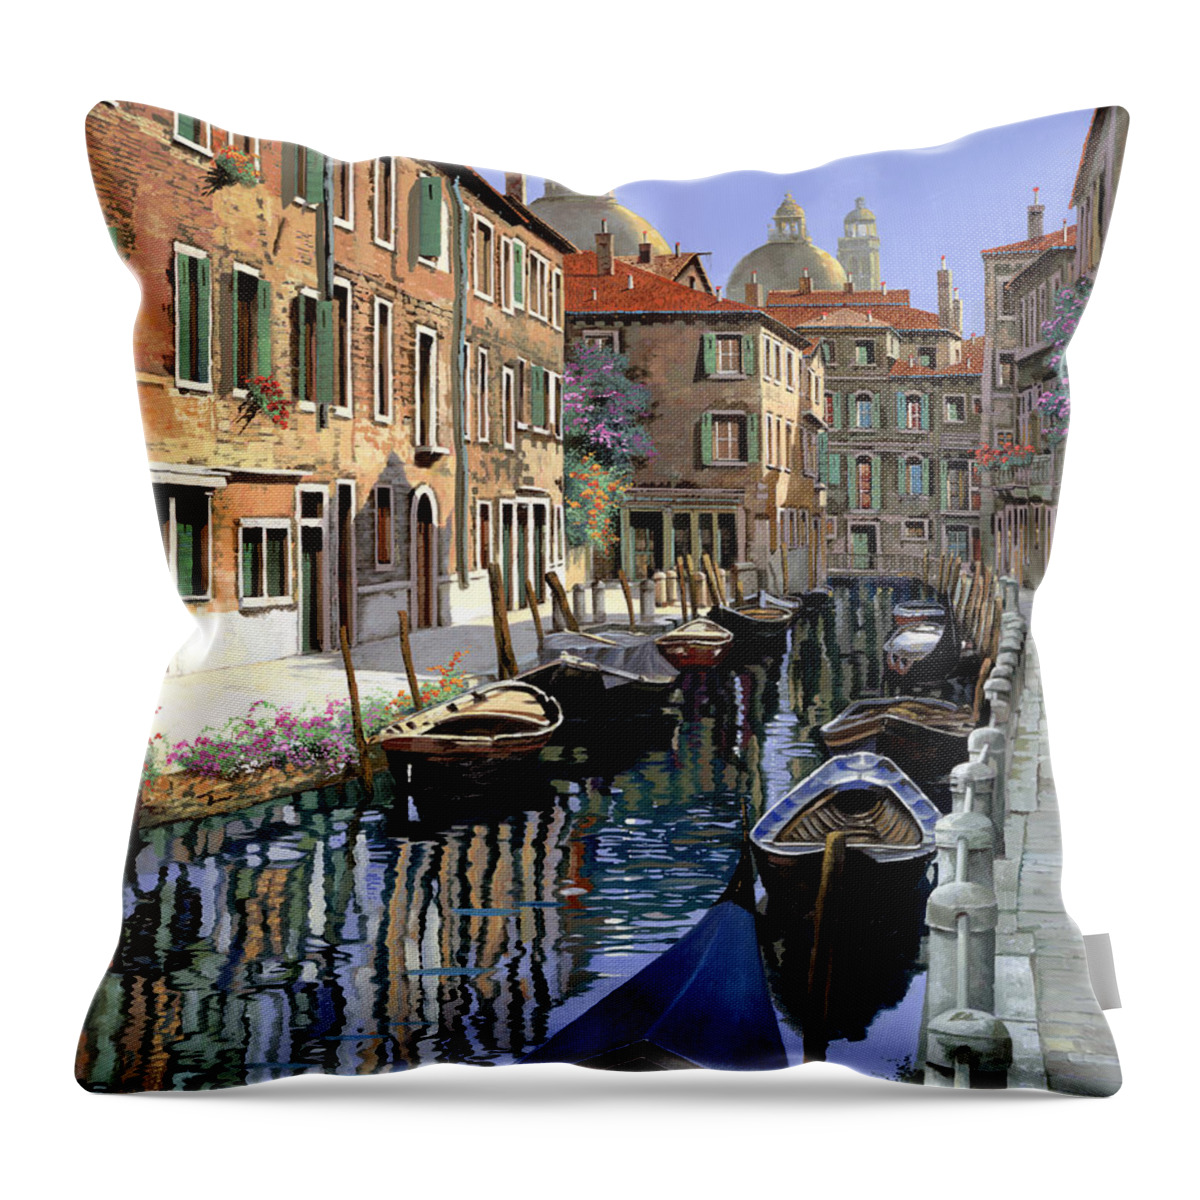 Venice Throw Pillow featuring the painting Le Barche Sul Canale by Guido Borelli